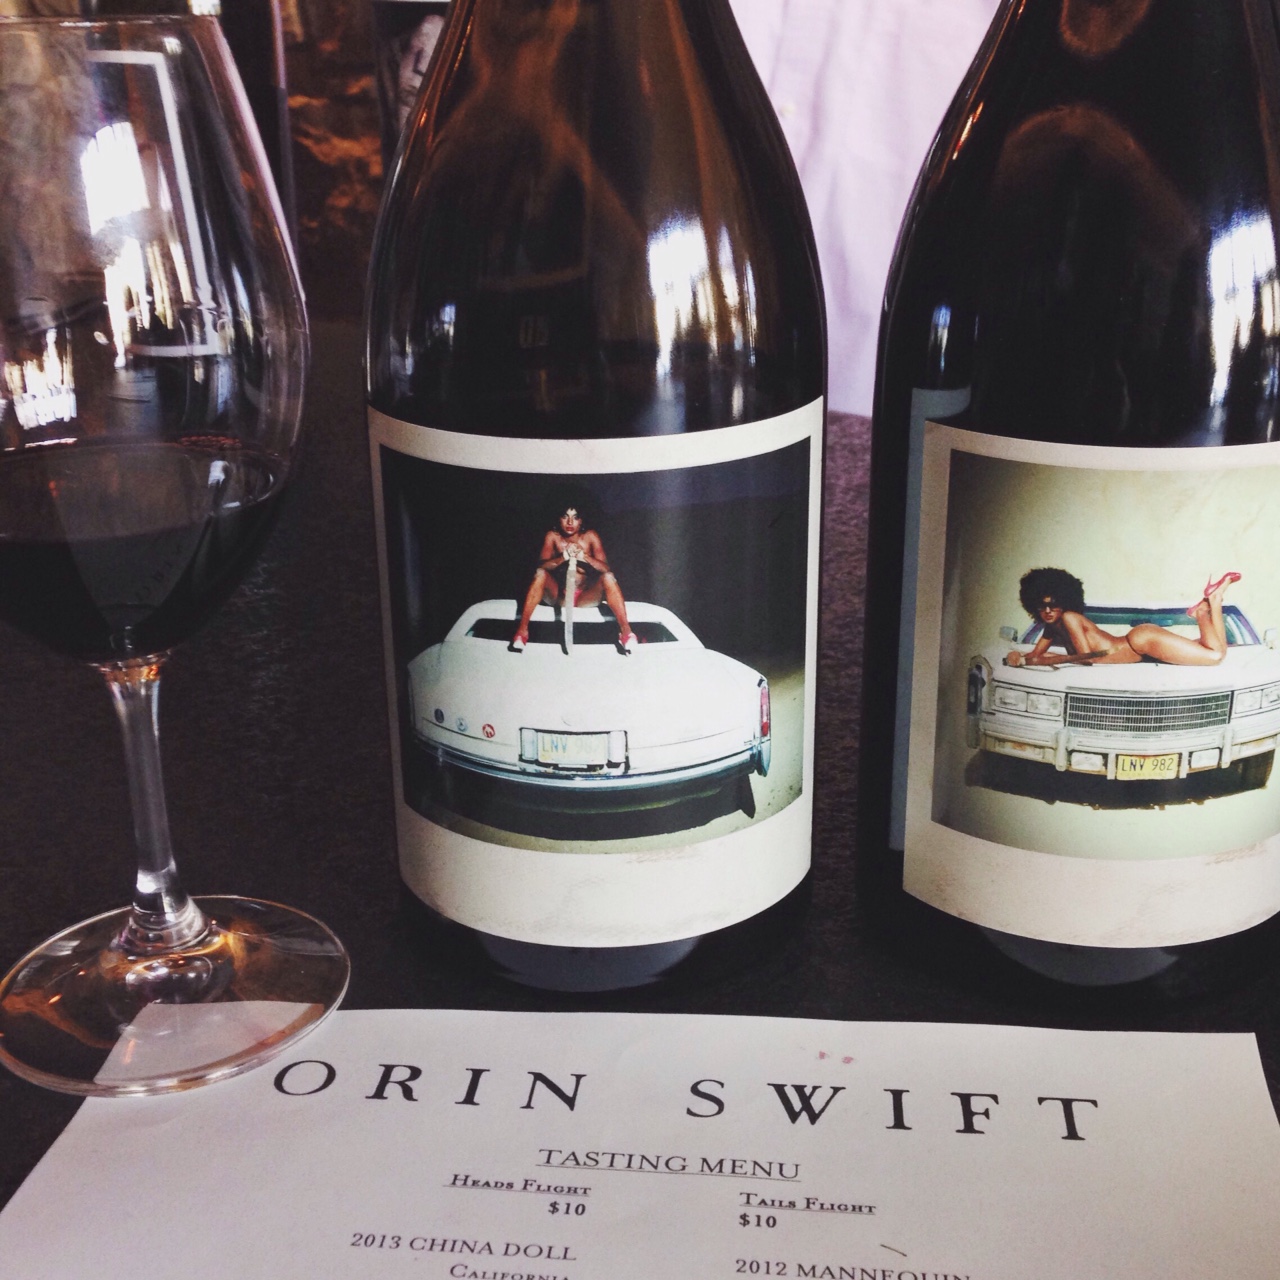  AND THE AWARD FOR SEXIEST LABEL GOES TO... ORIN SWIFT "MACHETE"&nbsp; 